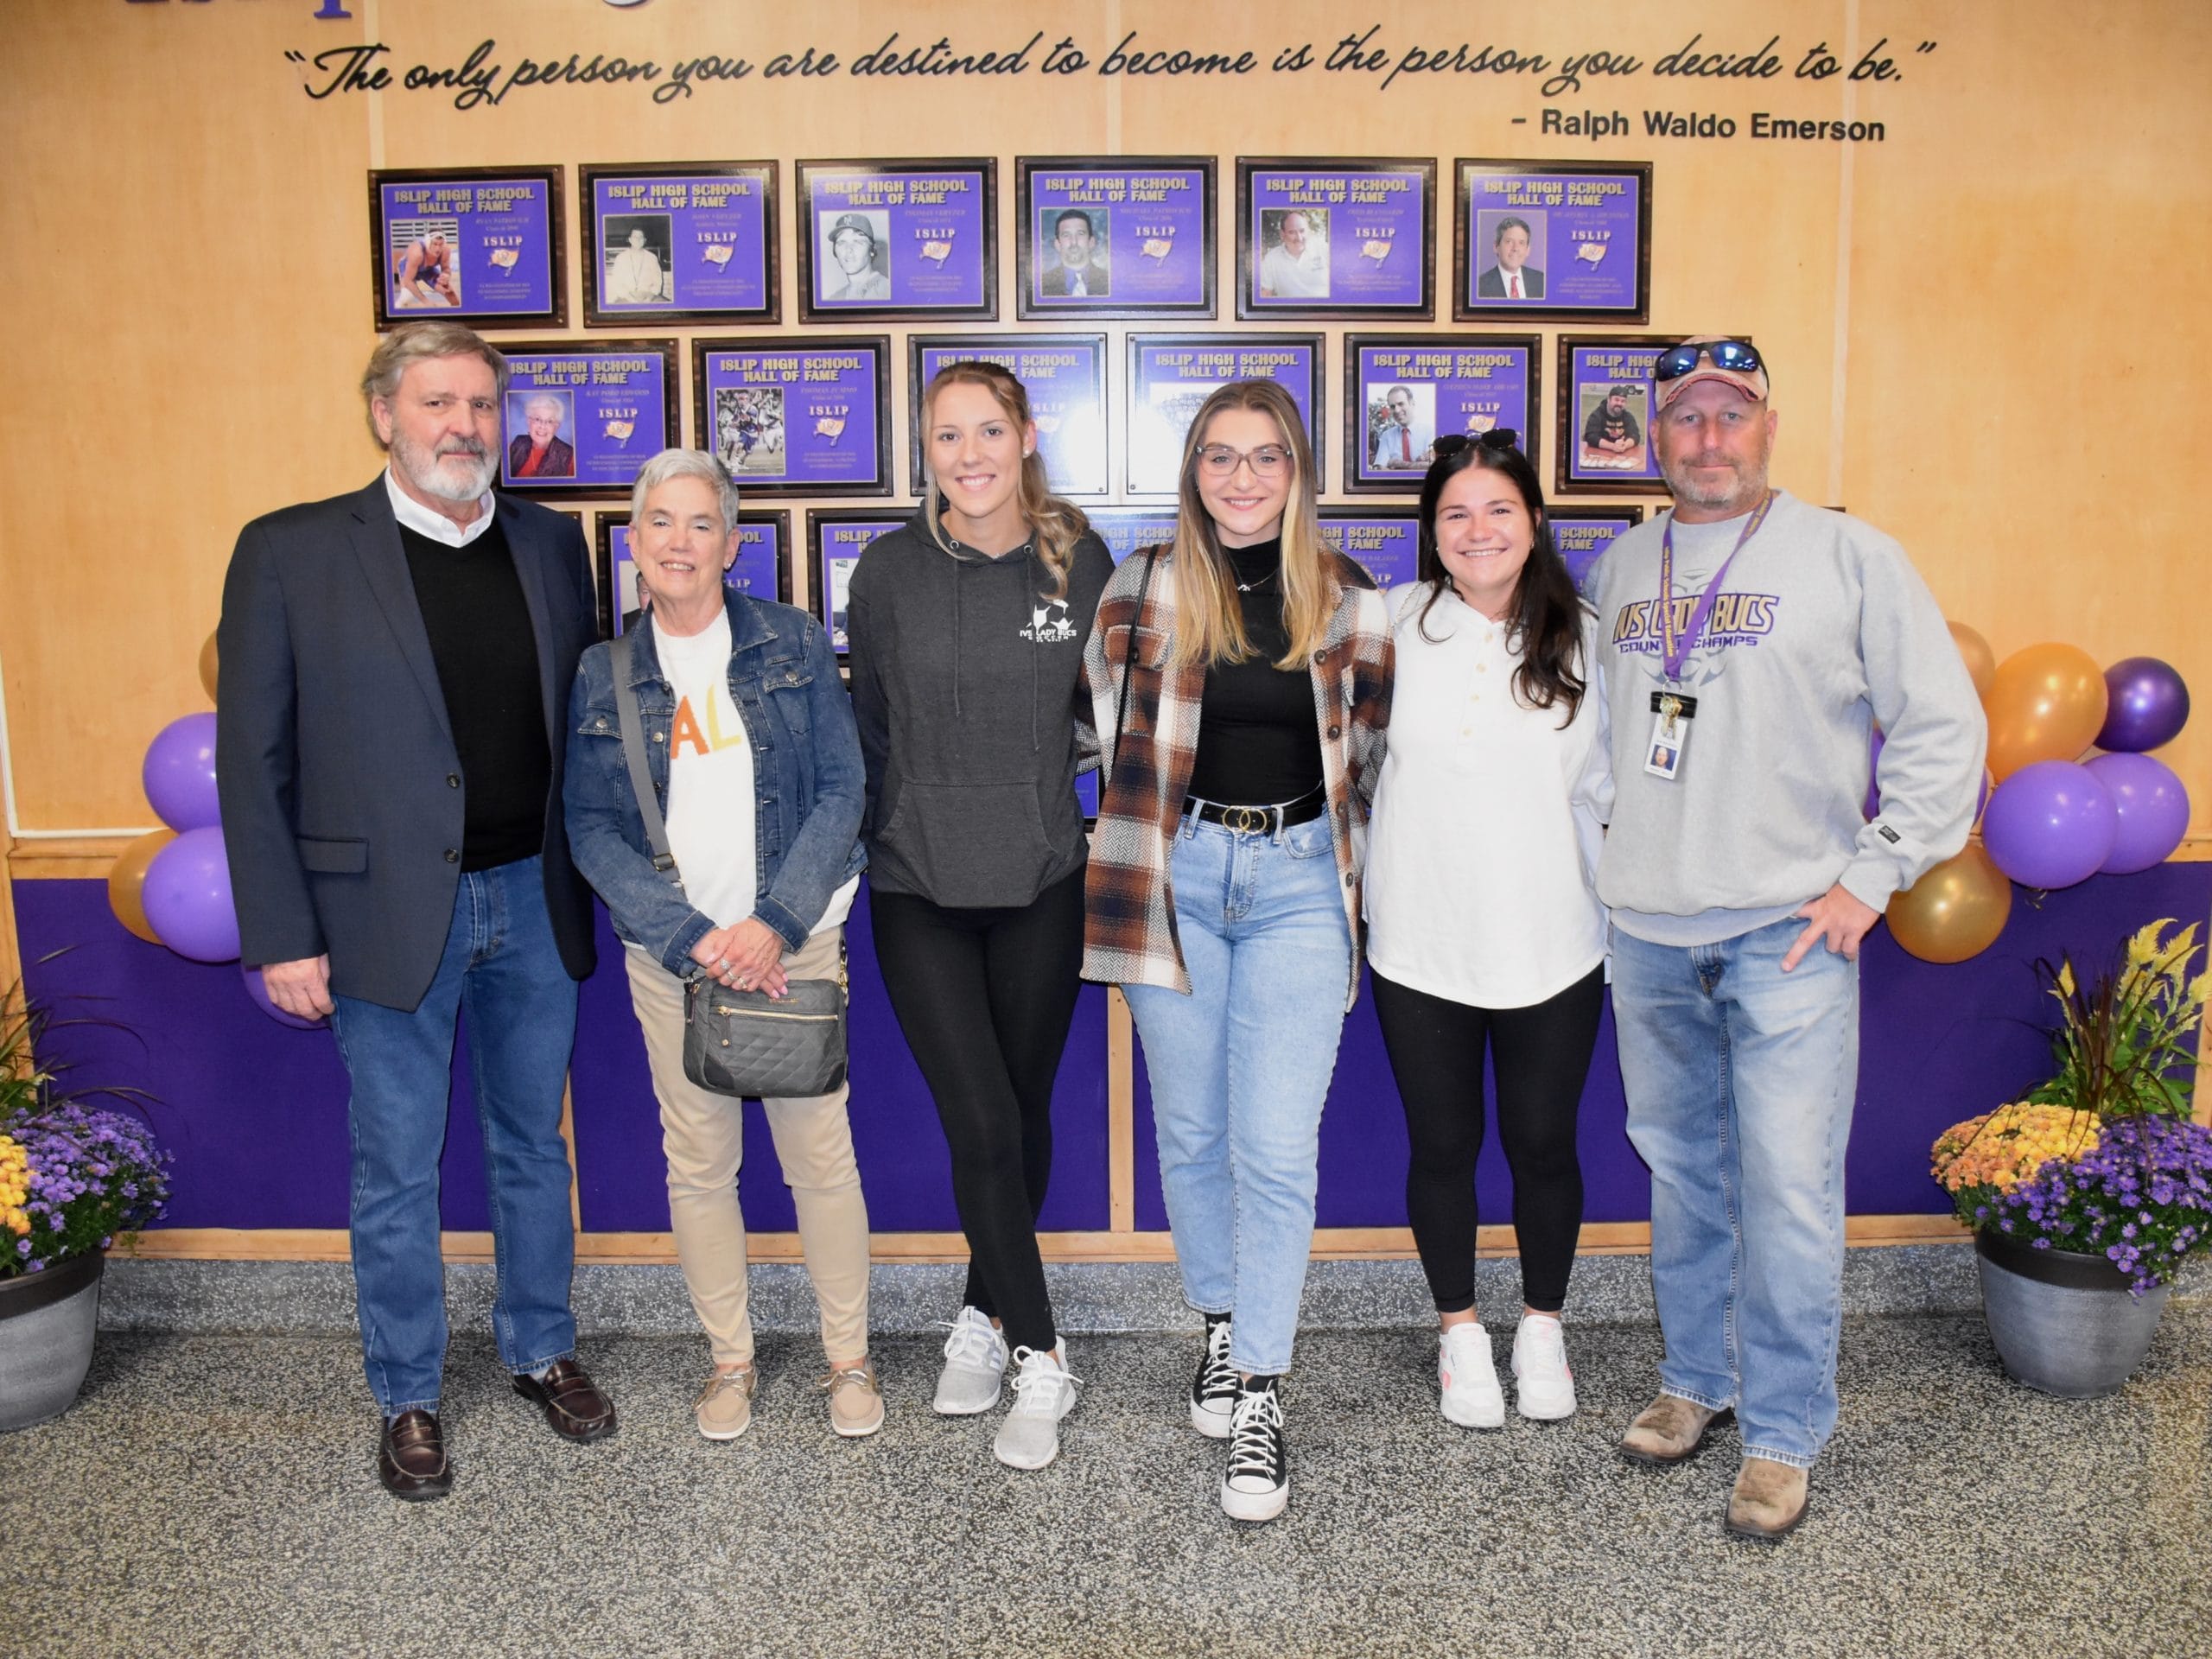 Islip’s 2022 Hall Of Fame Inductees Recognized